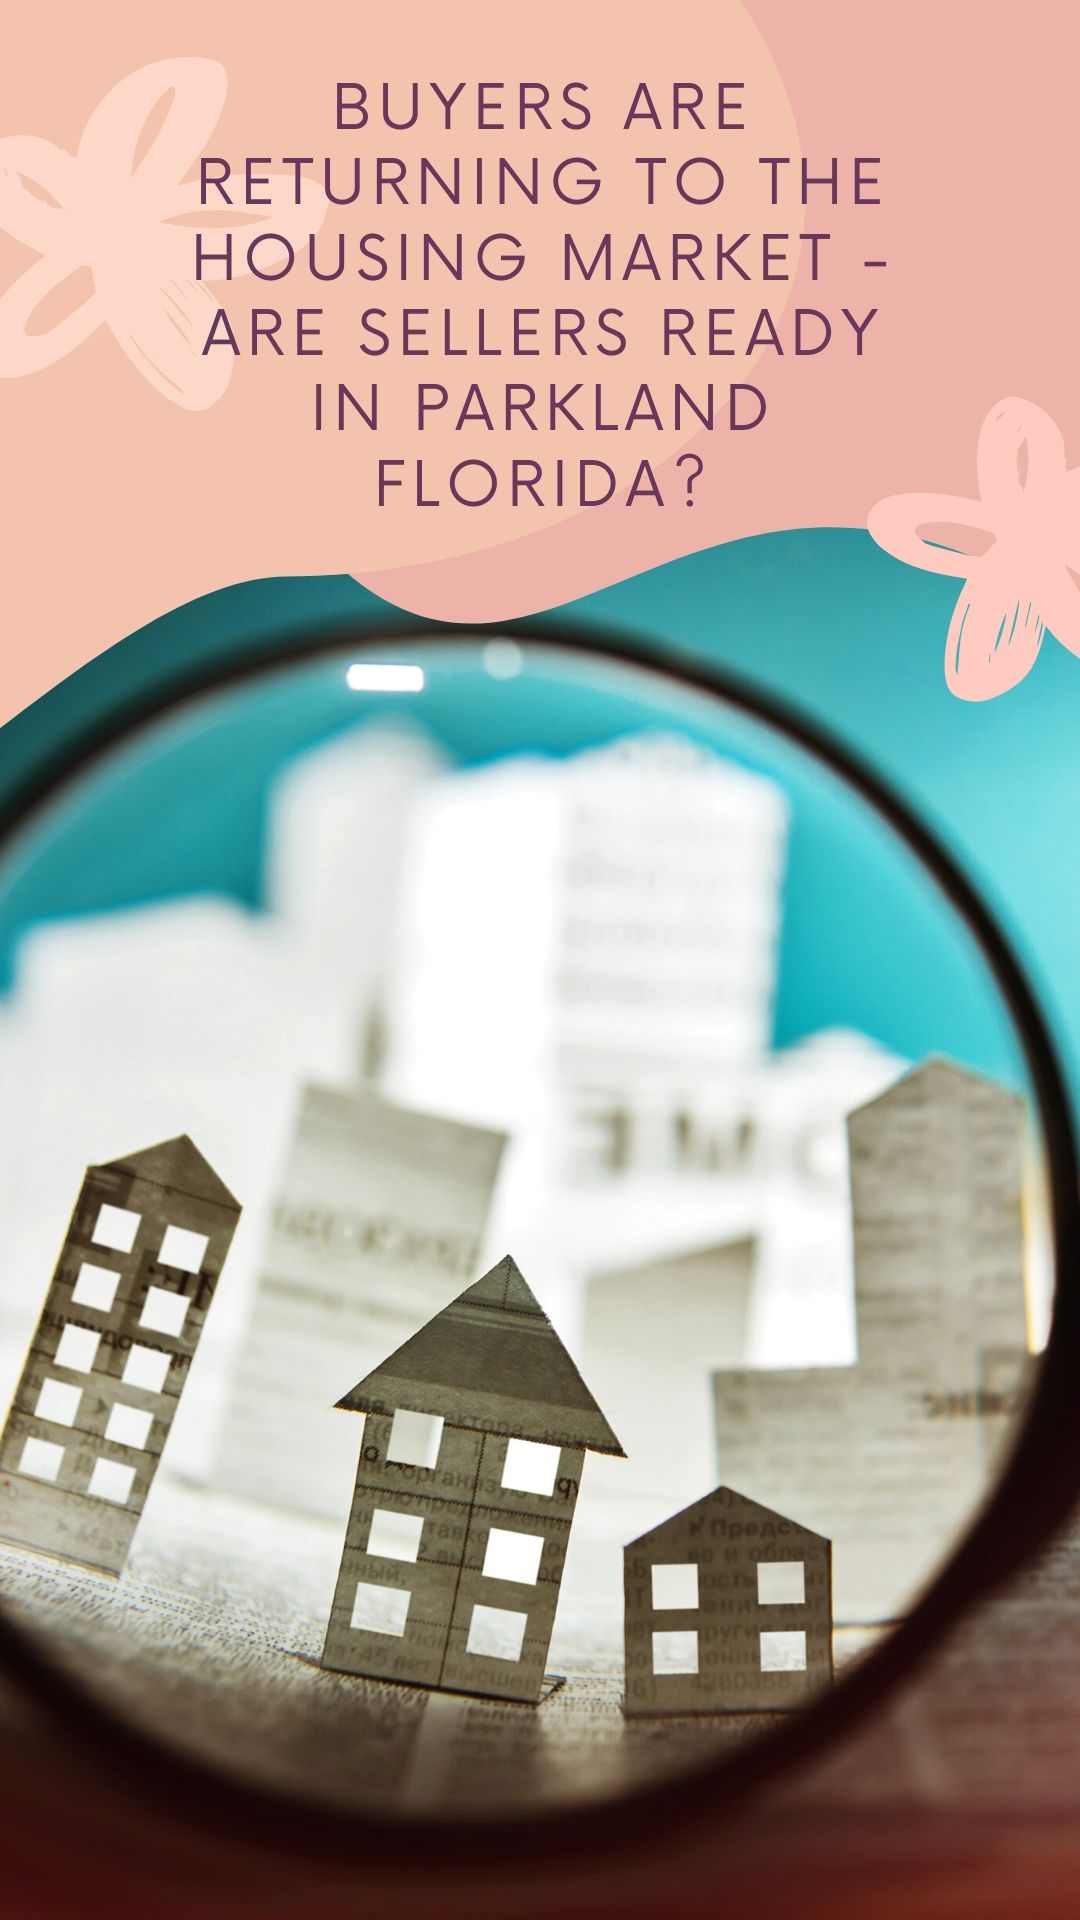 Buyers are Returning to the Housing Market - Are Sellers Ready in Parkland Florida?